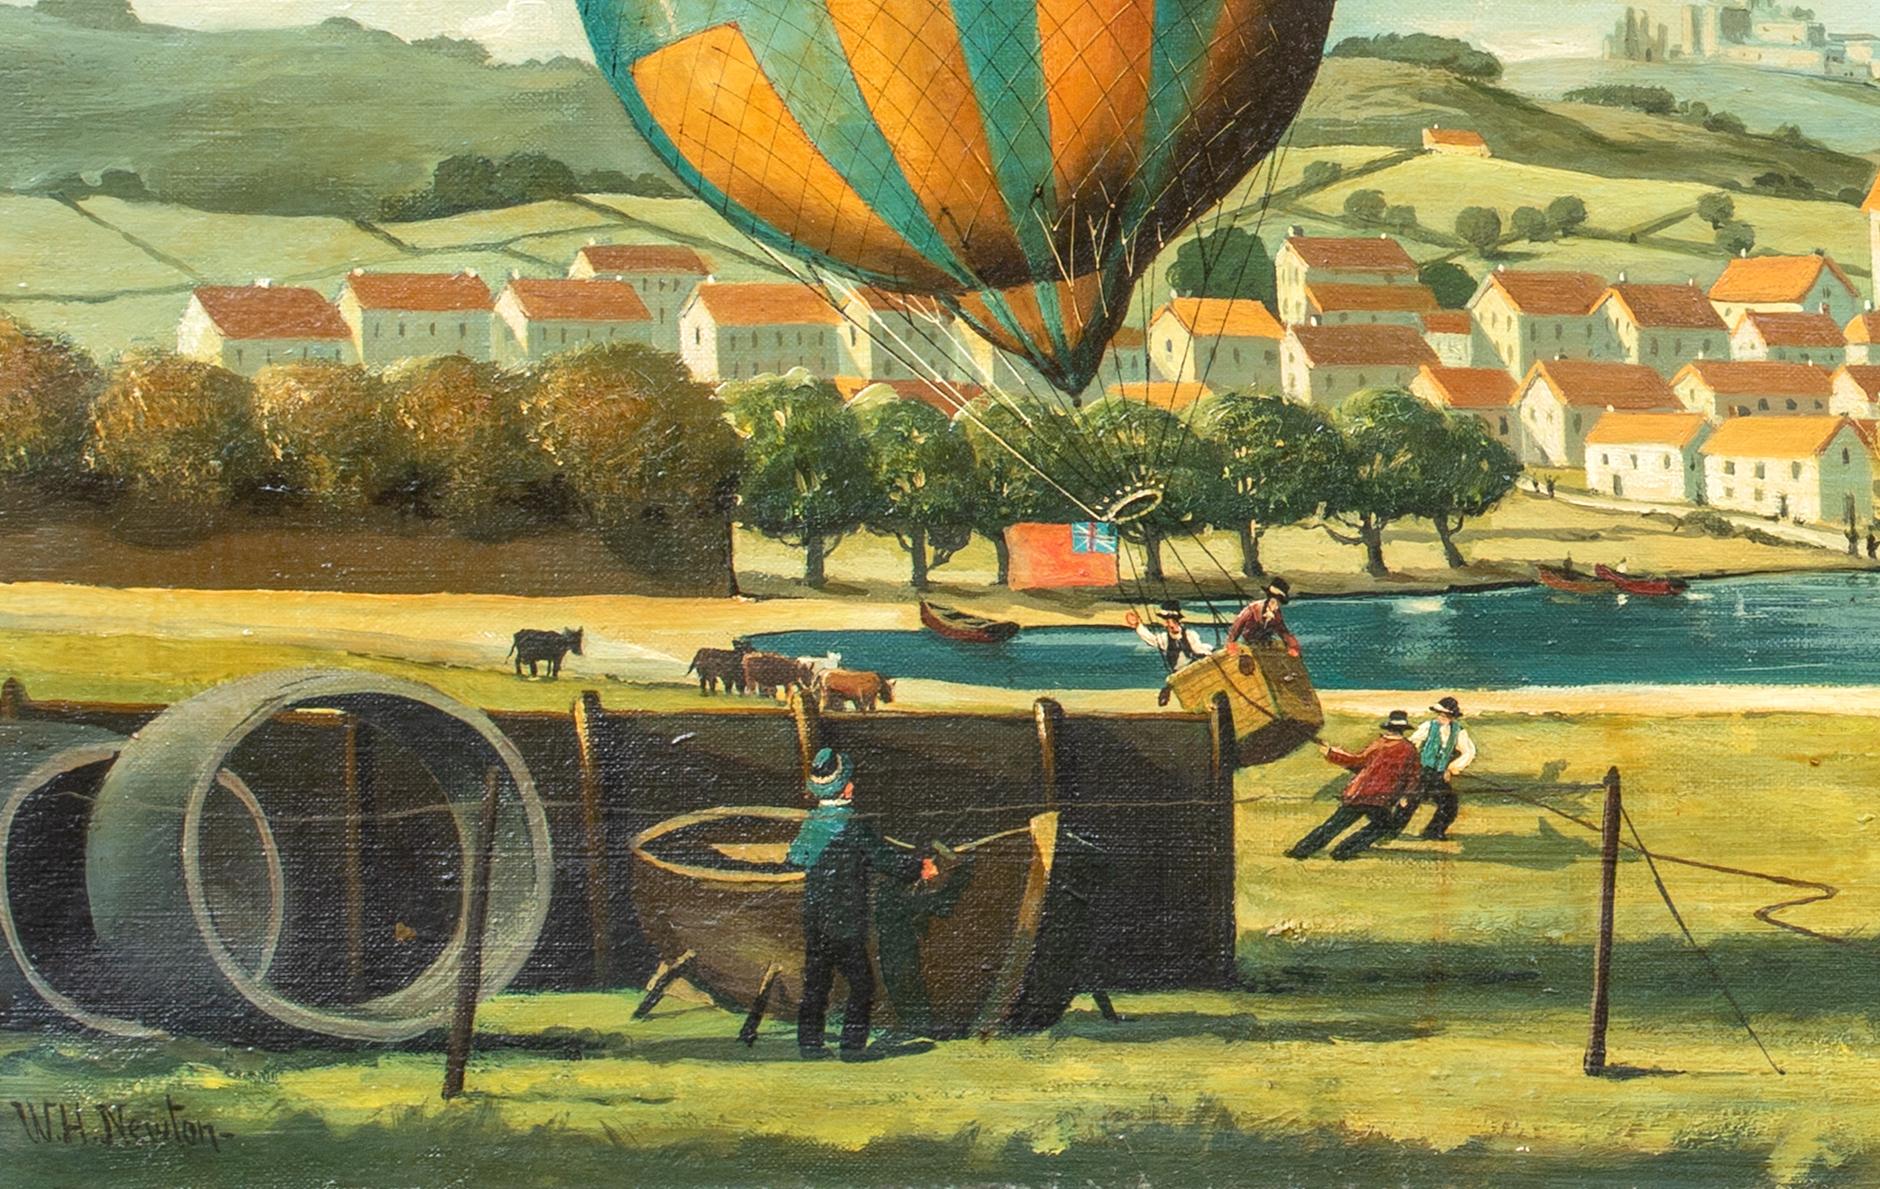 Hot Air Balloon Race Landscape, circa 1900

English School - signed W H NEWTON

Large 19th Century Landscape view of a town by the river with figures in the foreground with a hot air balloon, oil on canvas by W H Newton. Rare early original painting